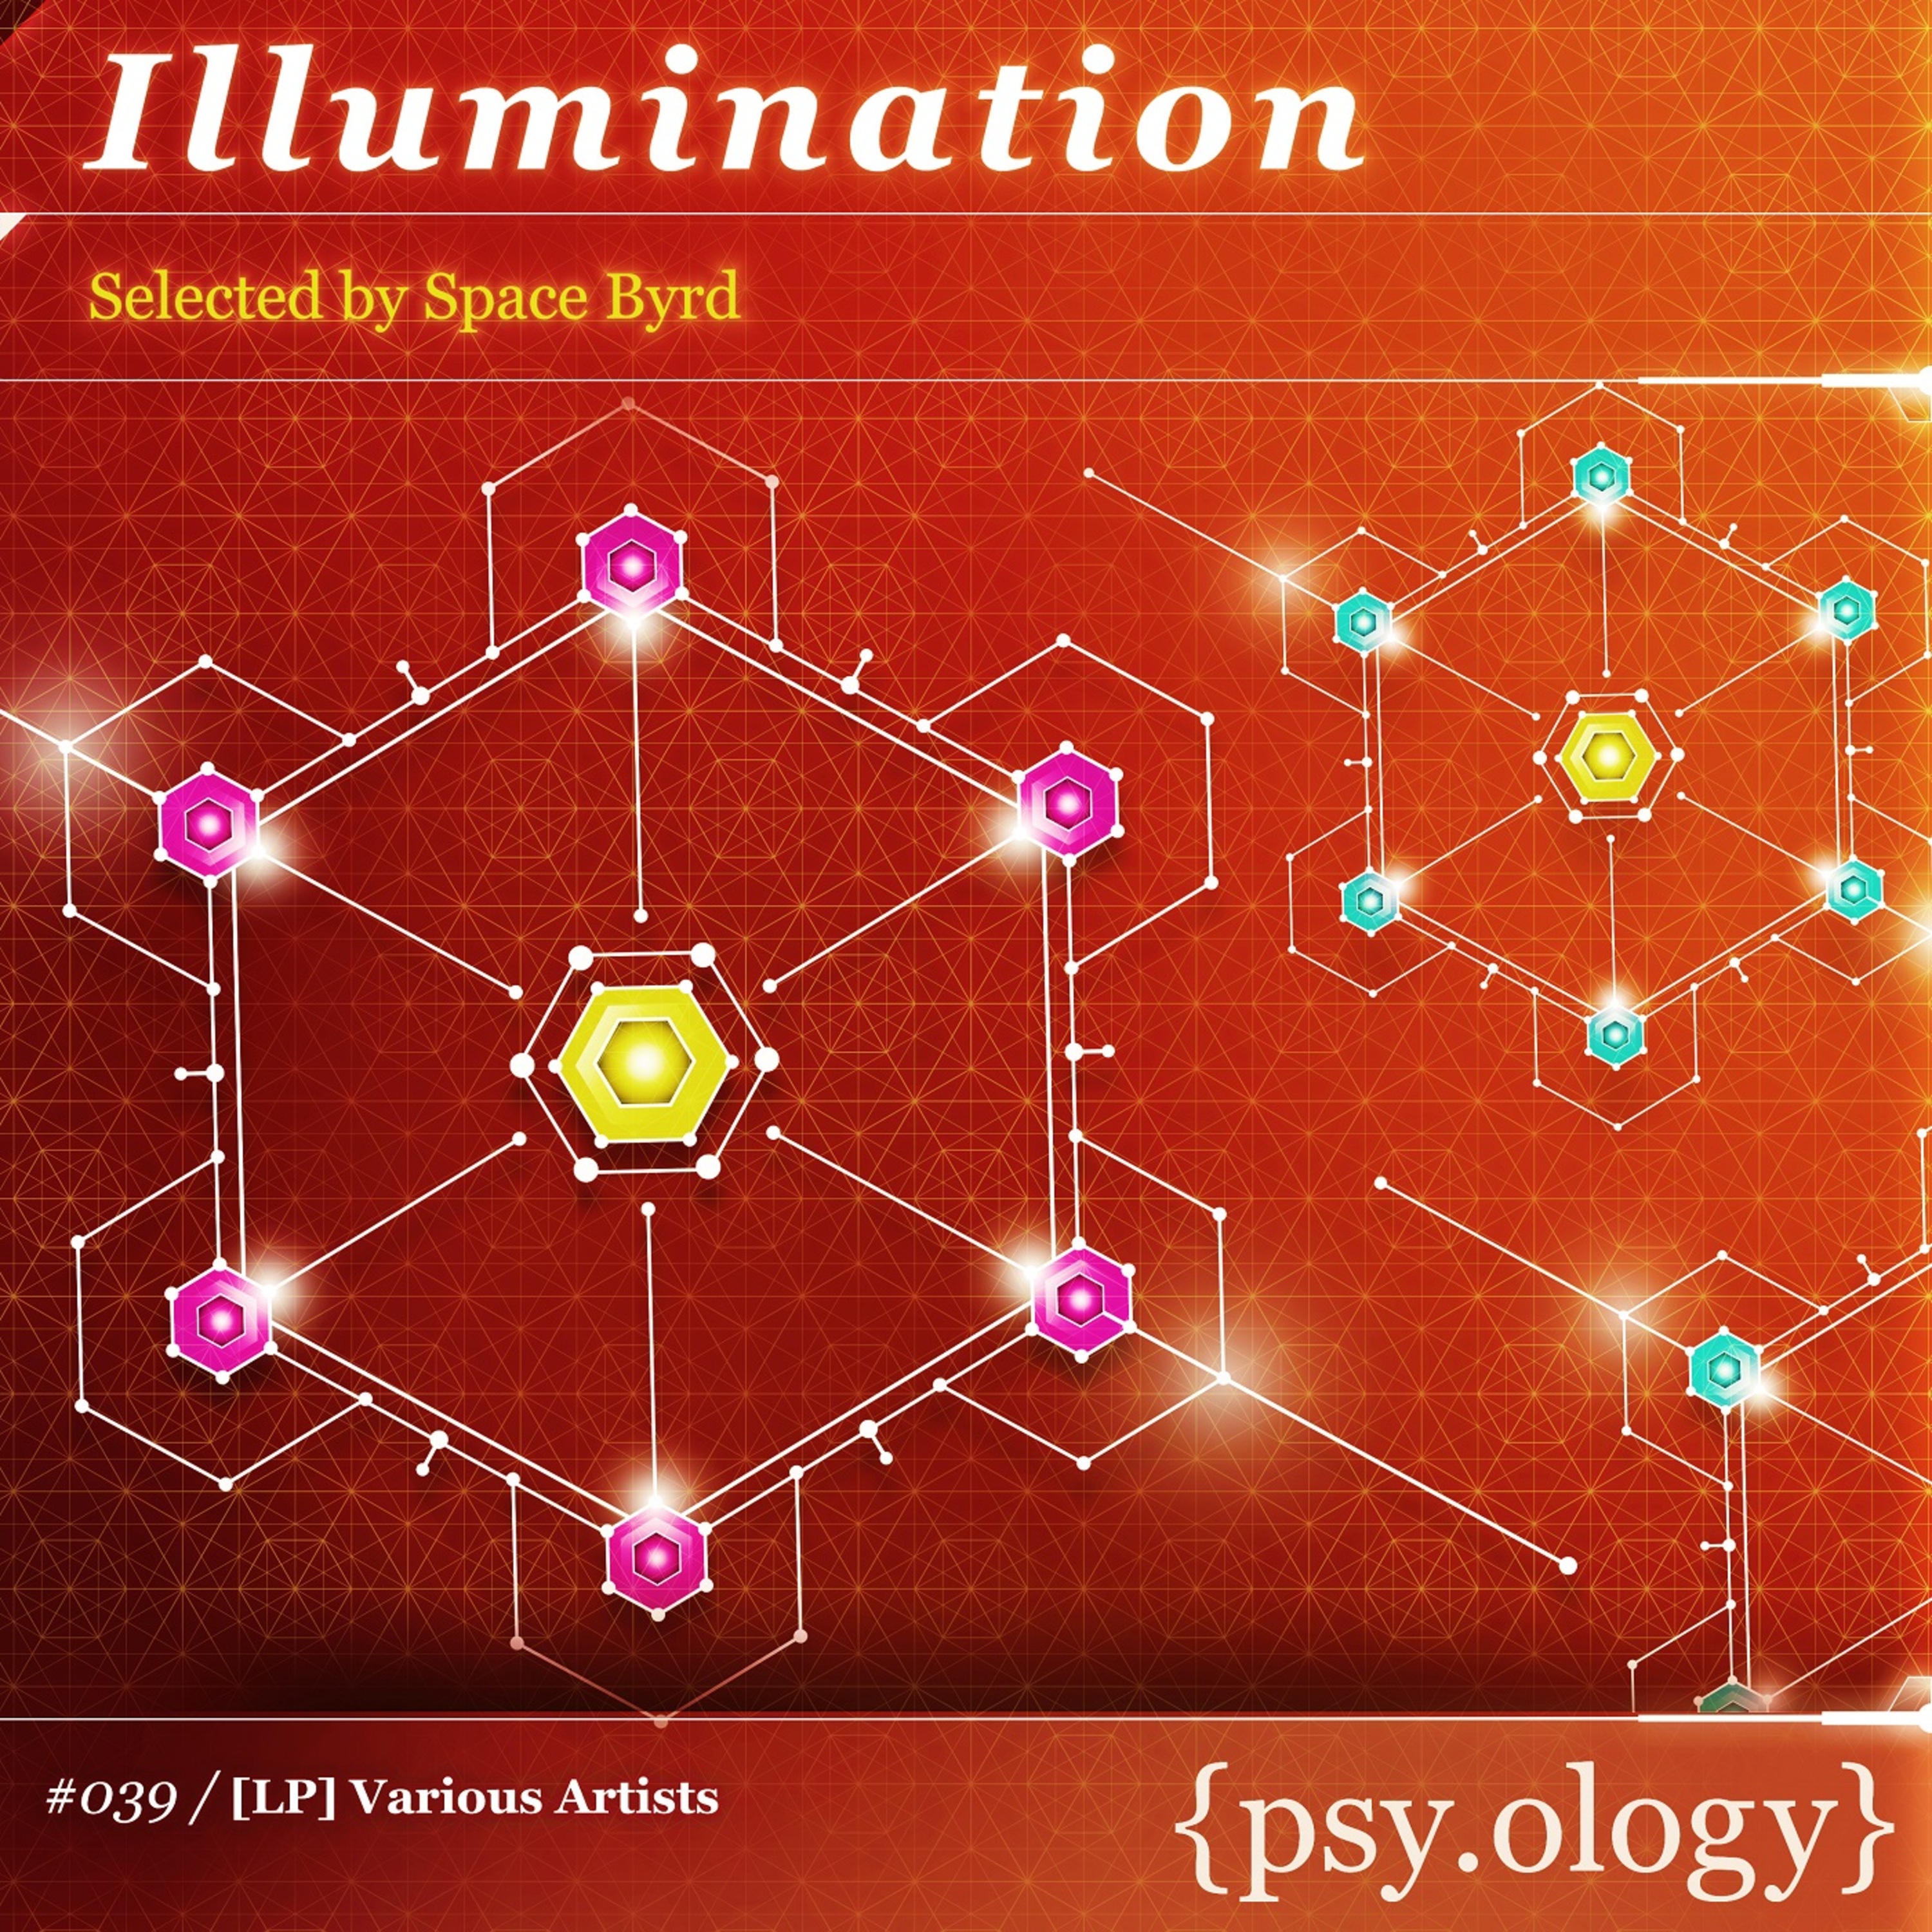 Illumination (Selected by Space Byrd)